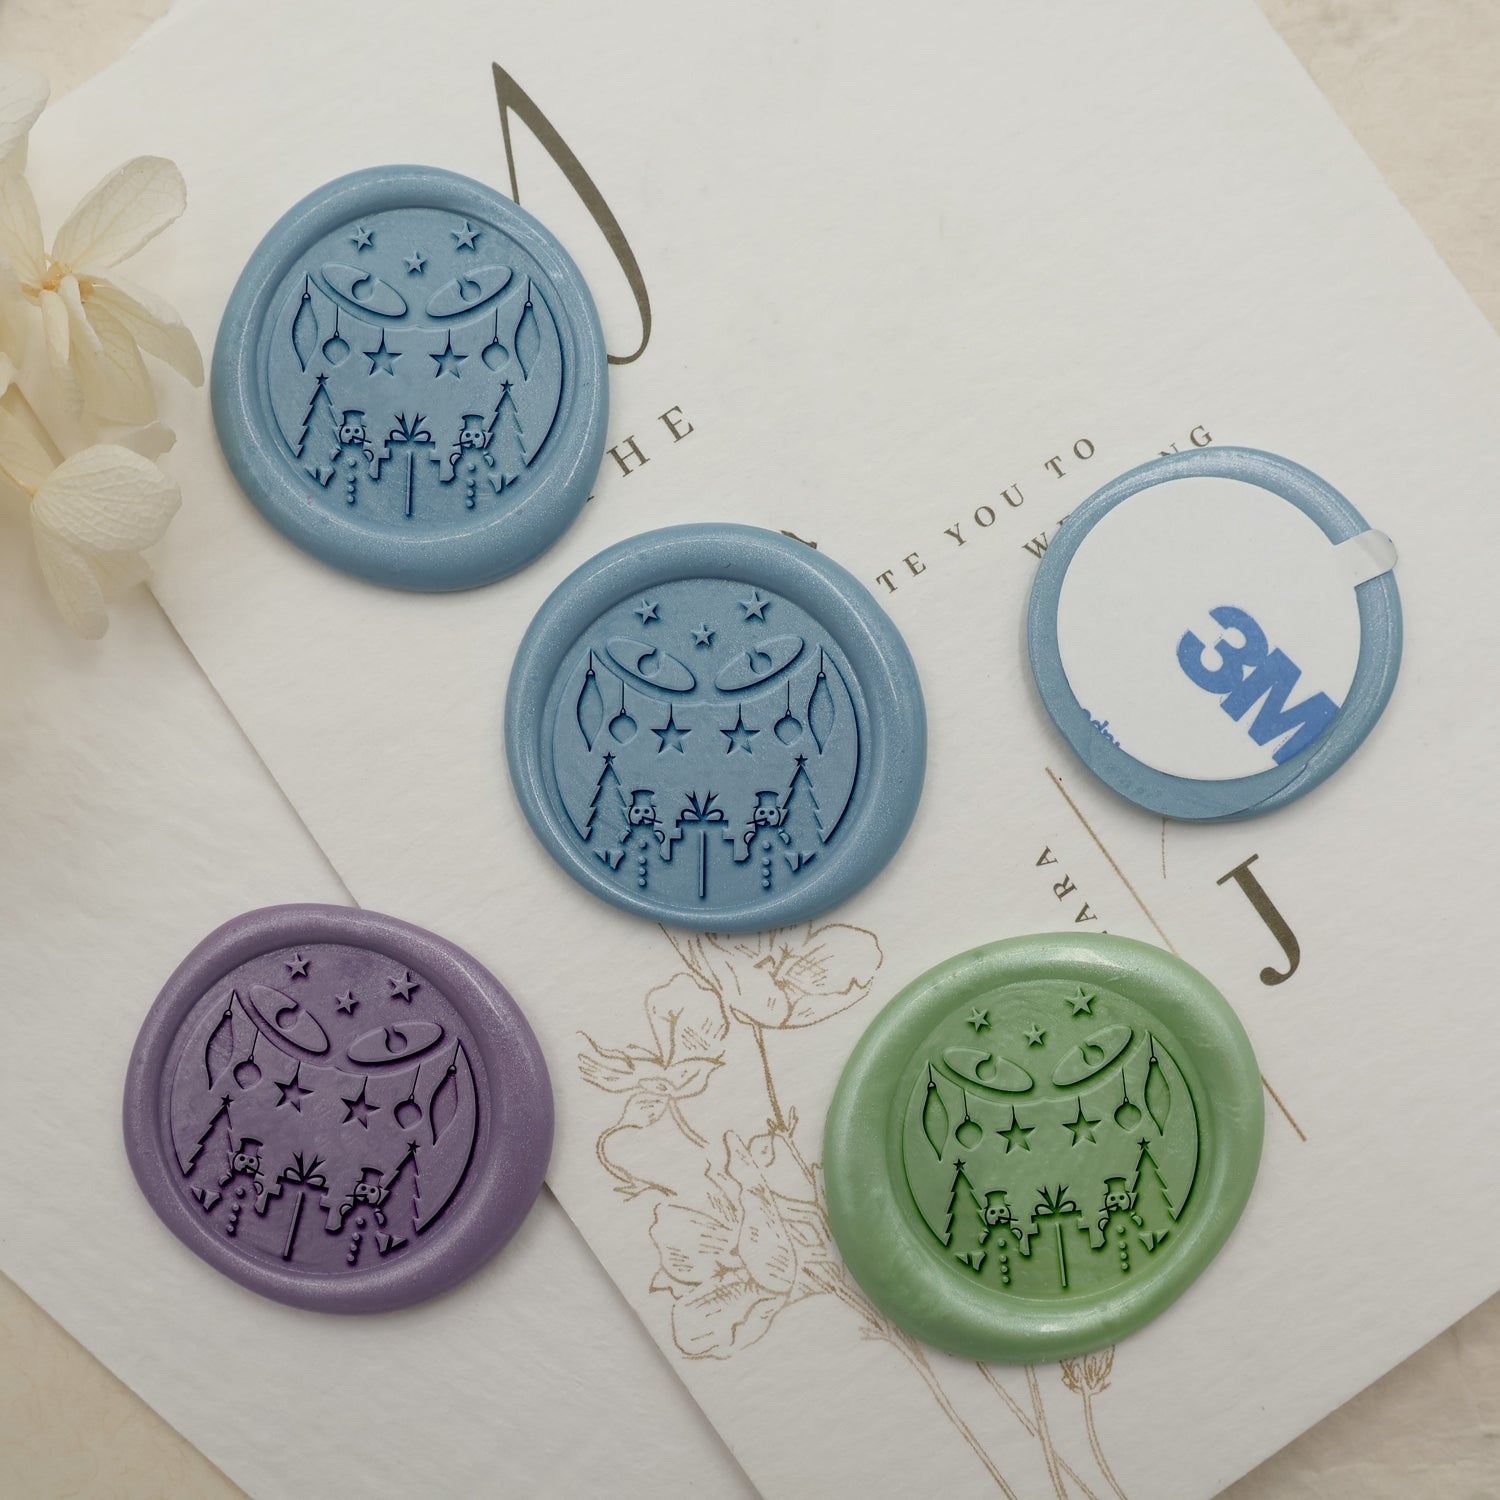 Wax Seal Stamp Set, 4 Pieces Sealing Wax Stamps - Starry Sky